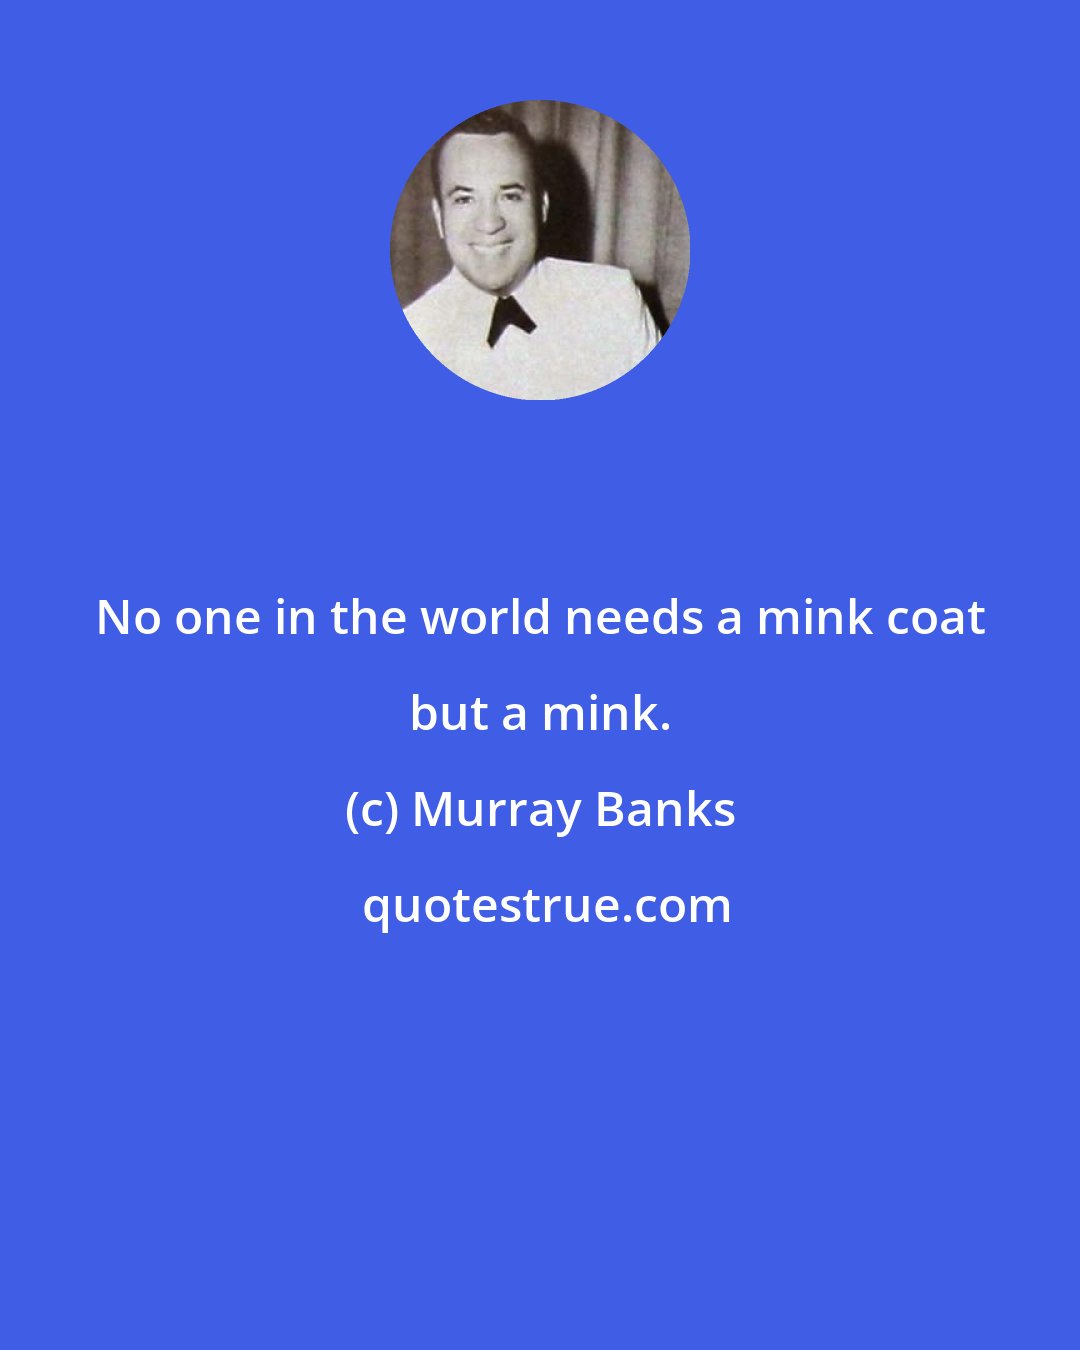 Murray Banks: No one in the world needs a mink coat but a mink.